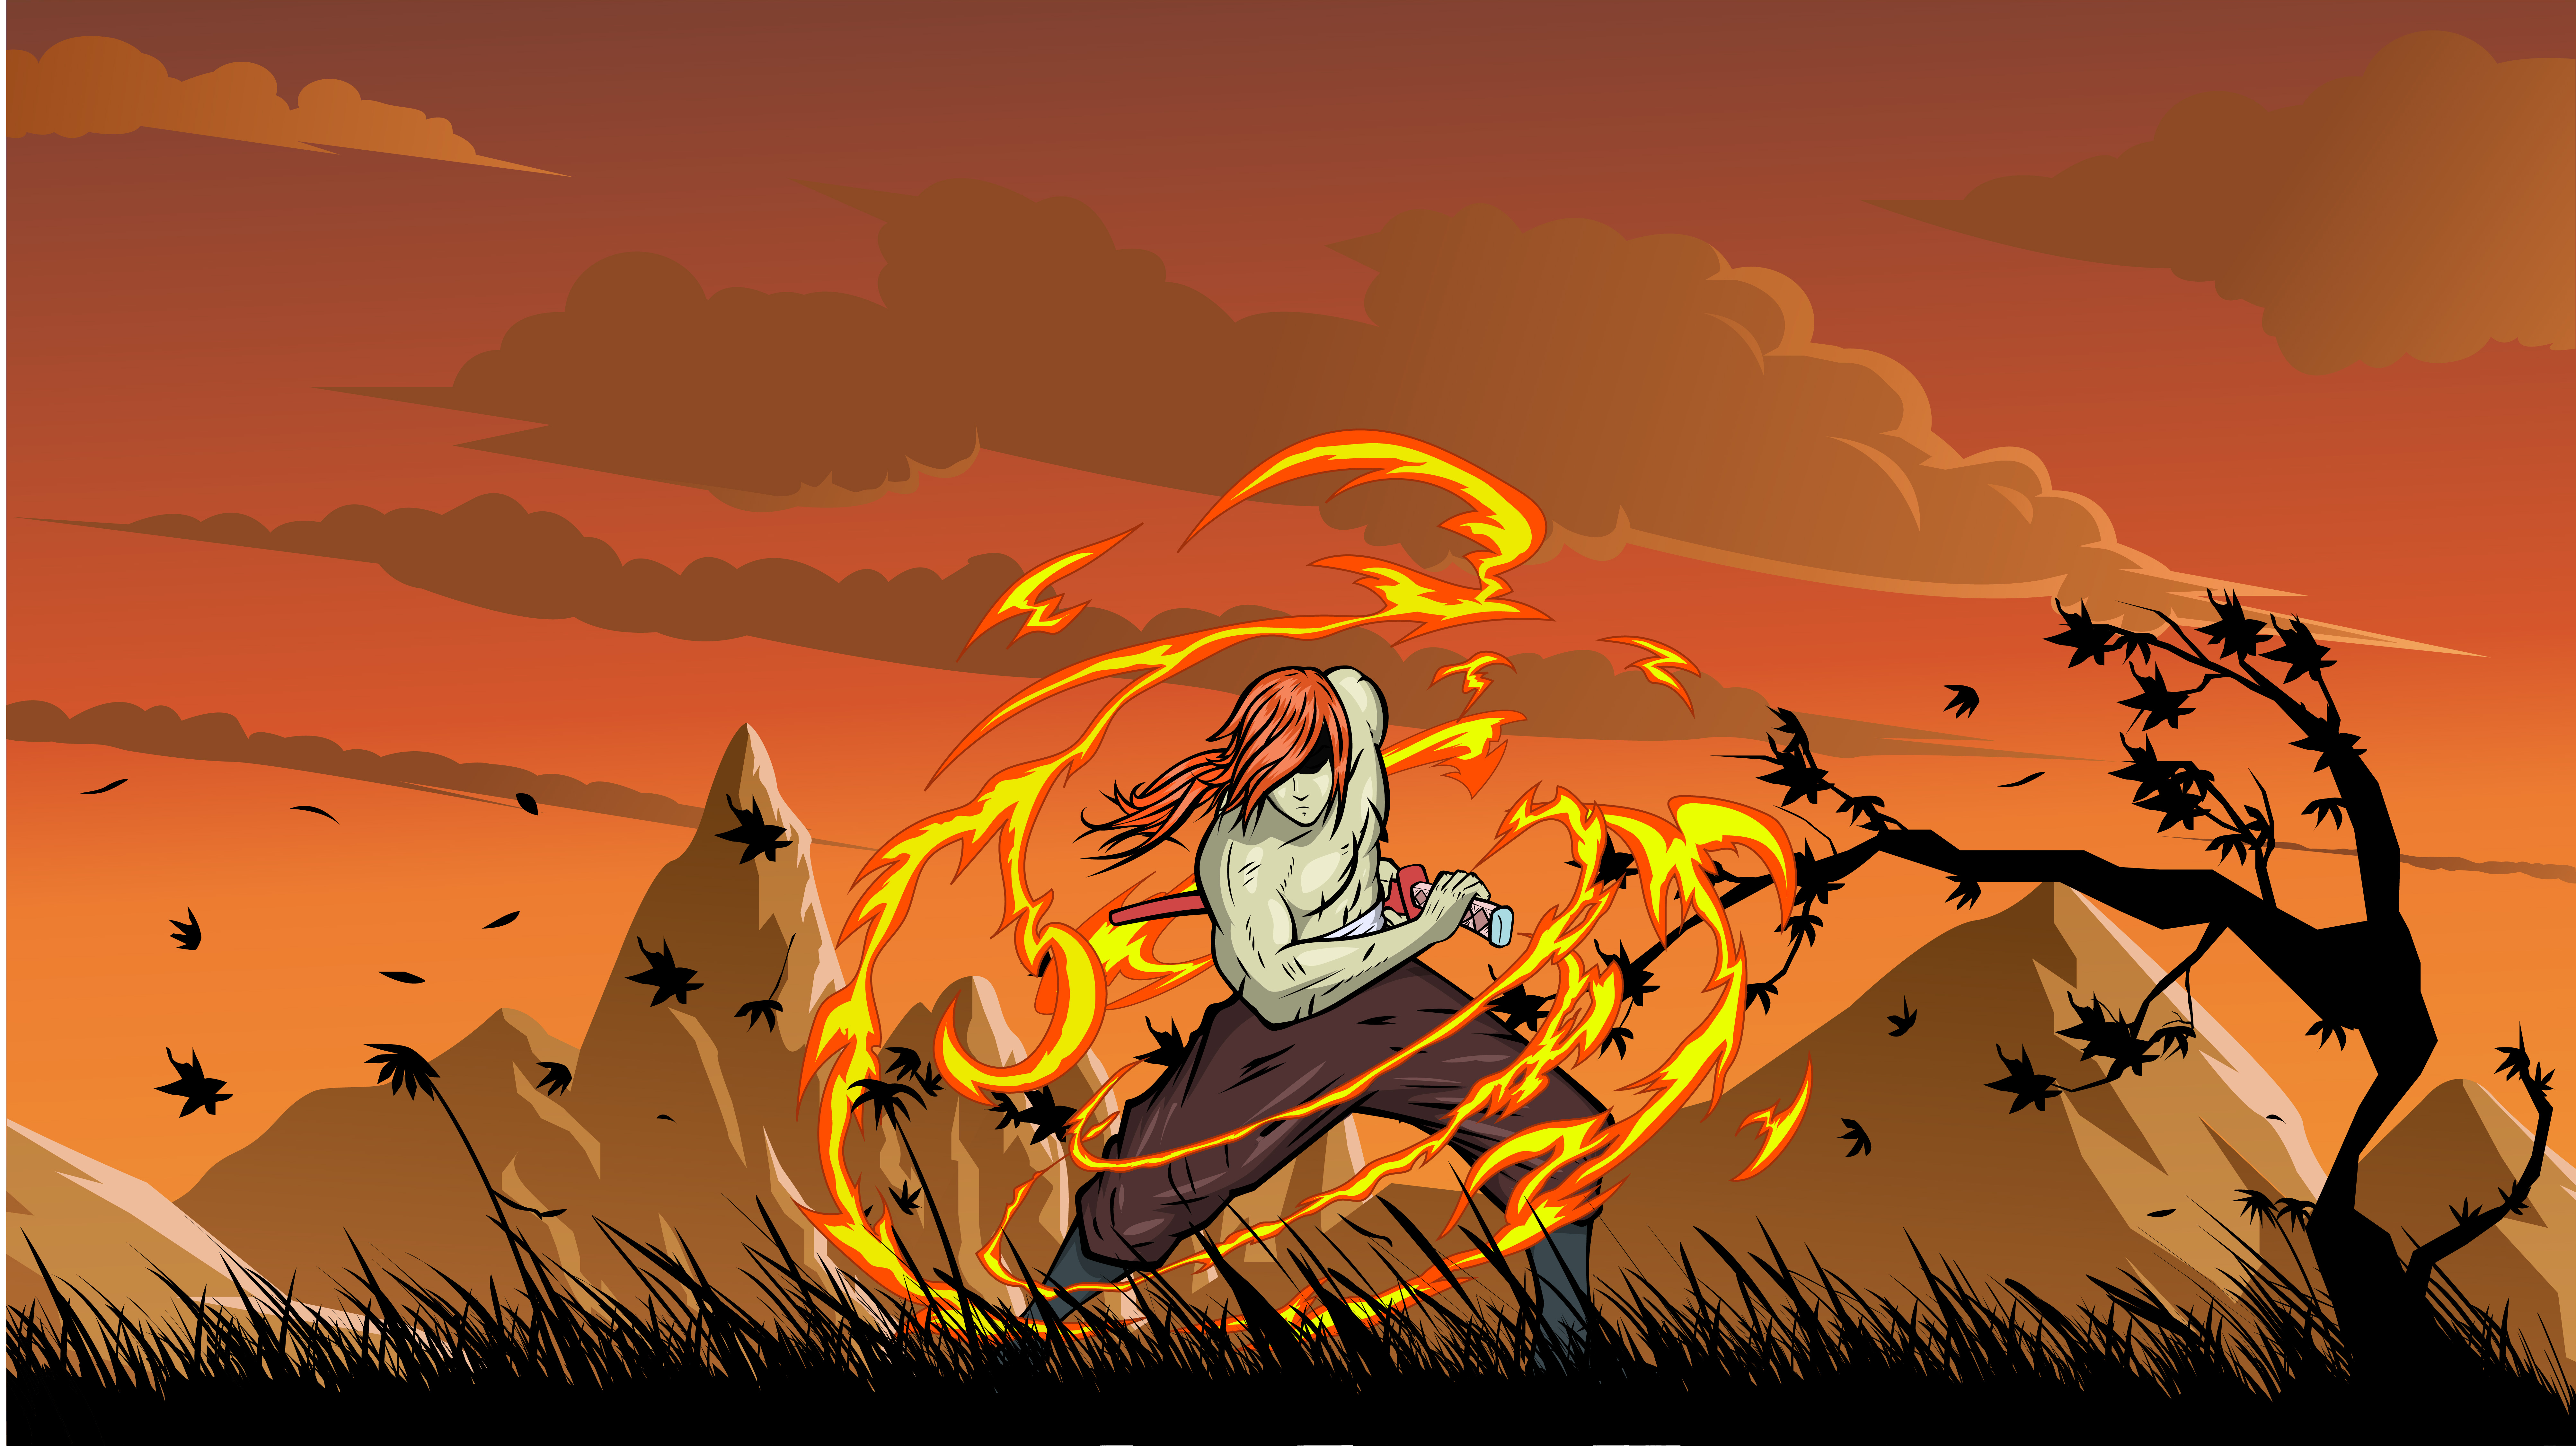 Anime Samurai Holding a Sword with Flame Effect in a Valley of Tall Grass